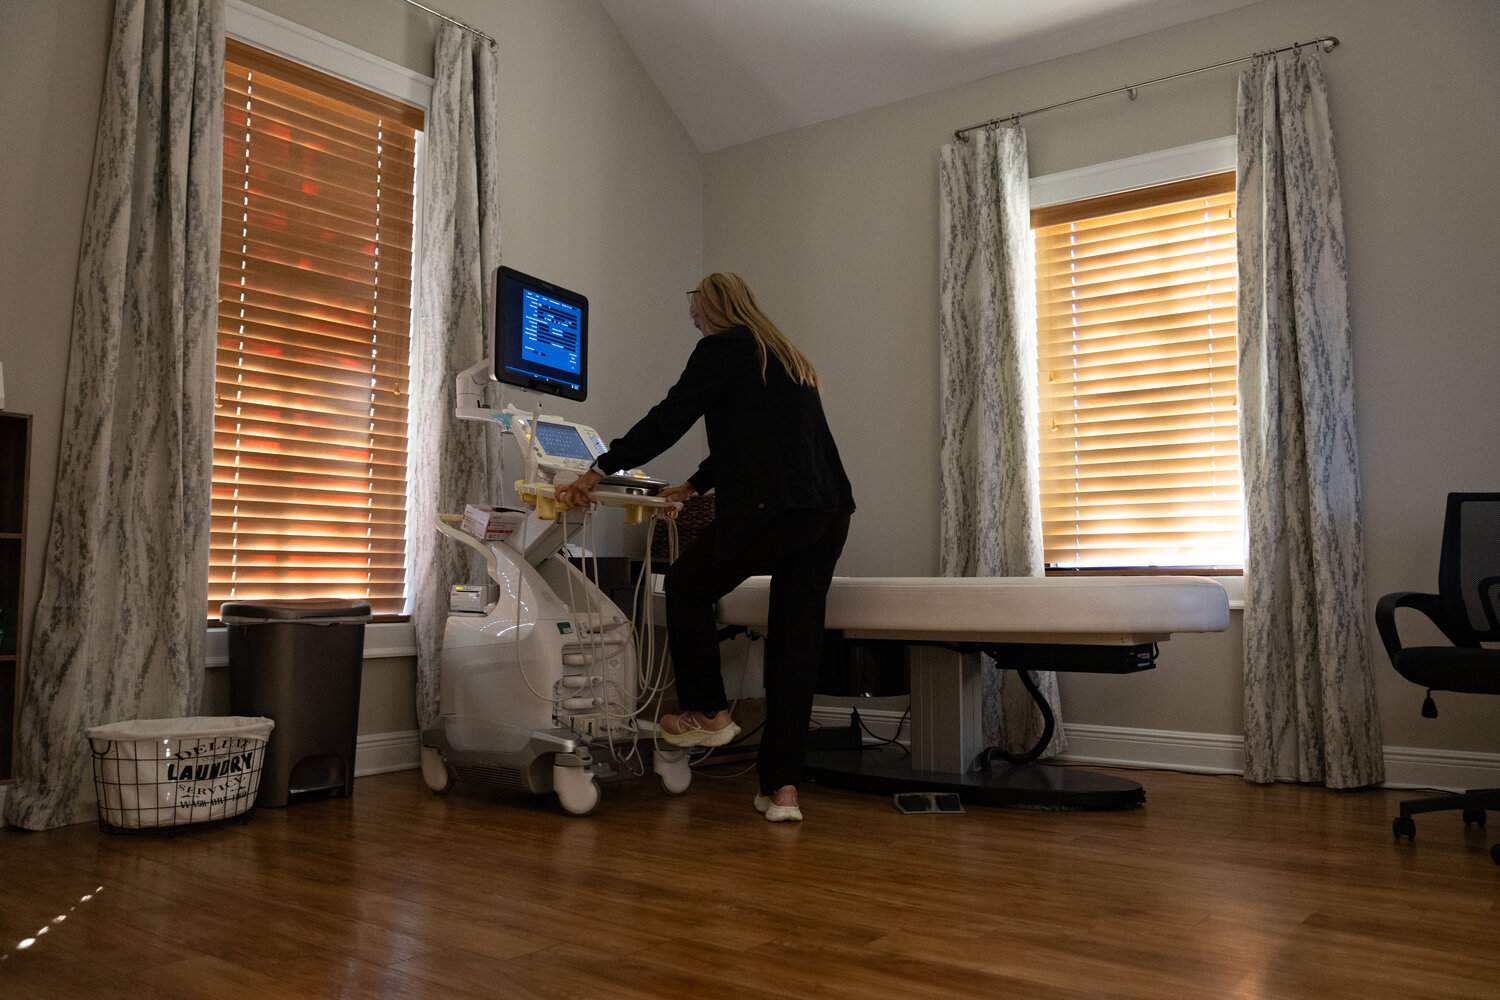 An employee at Women's Imaging Specialists in Fairhope preparing a room to complete an ultrasound on a patient.